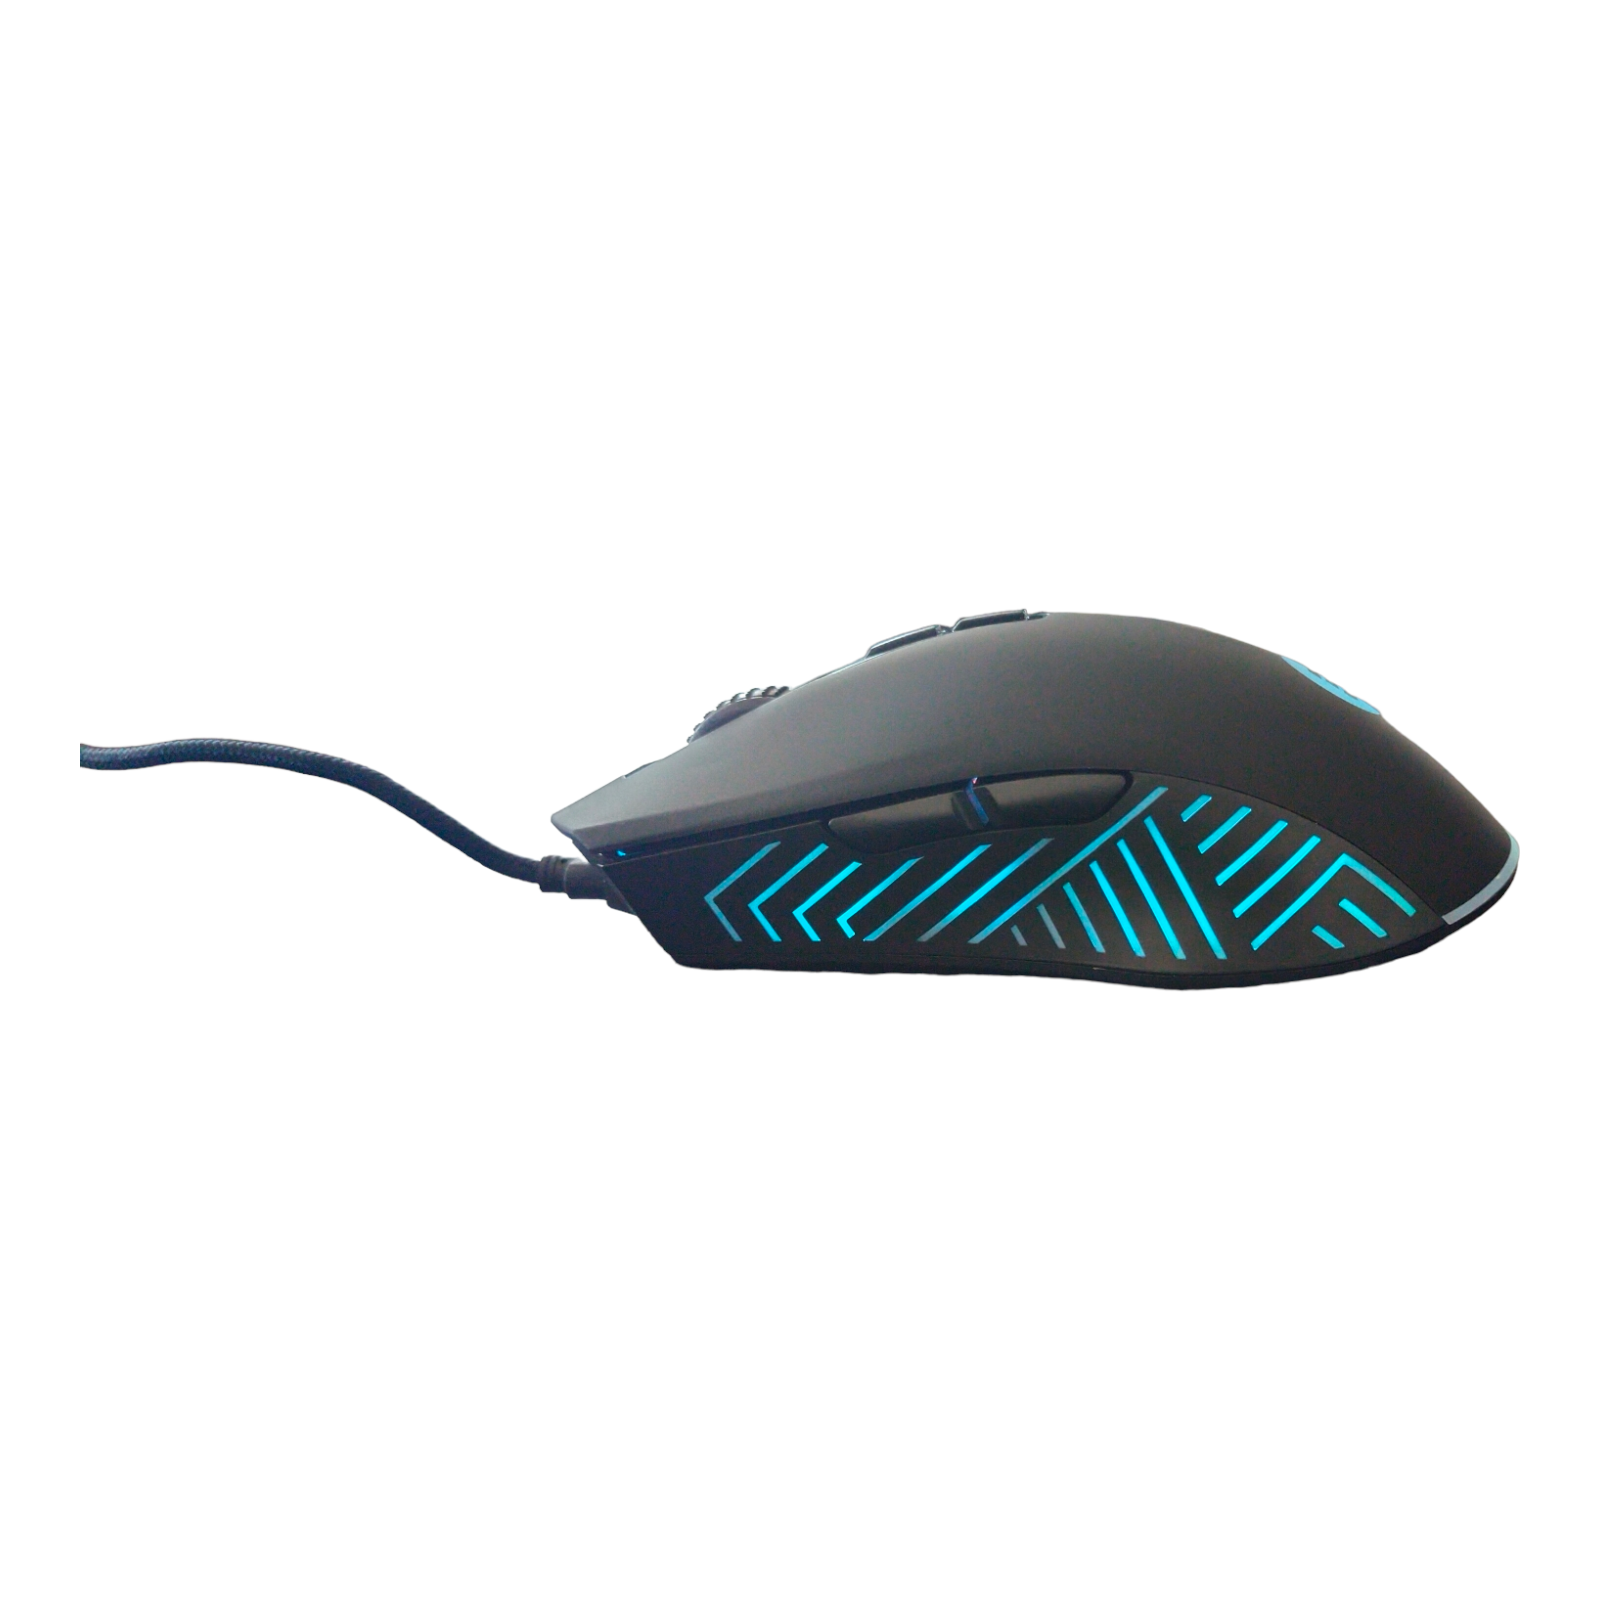 5STAR GMS100 MOUSE